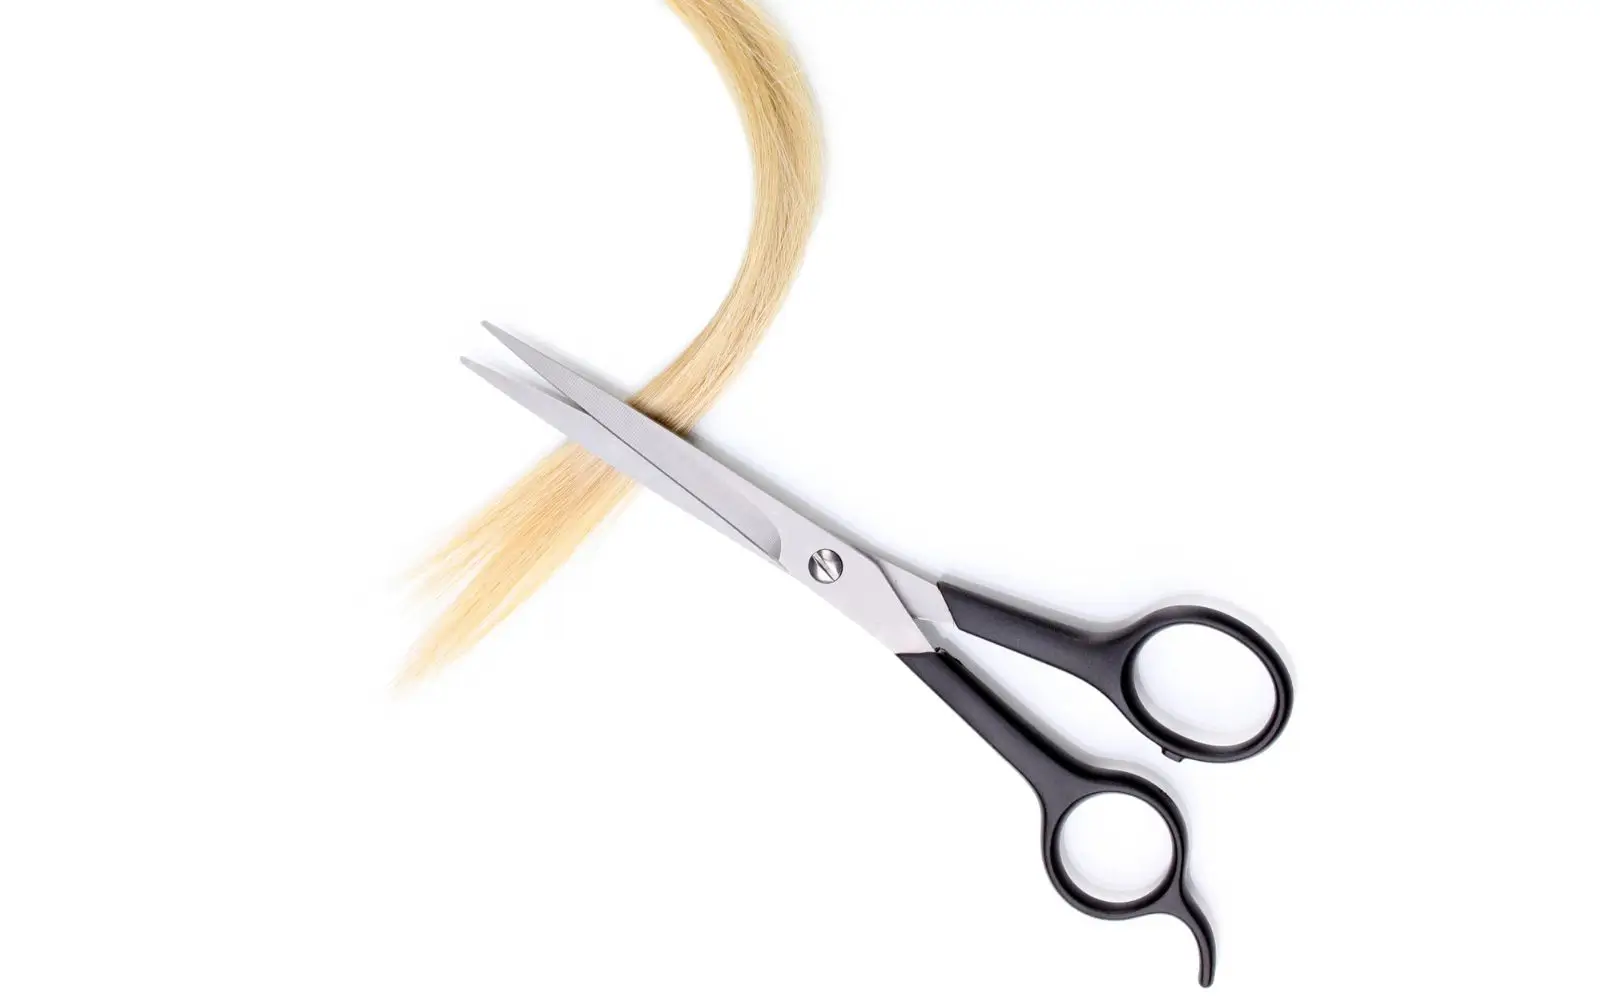 Professional scissors cutting through a lock of blonde hair, illustrating the hair sample collection process for drug and alcohol testing